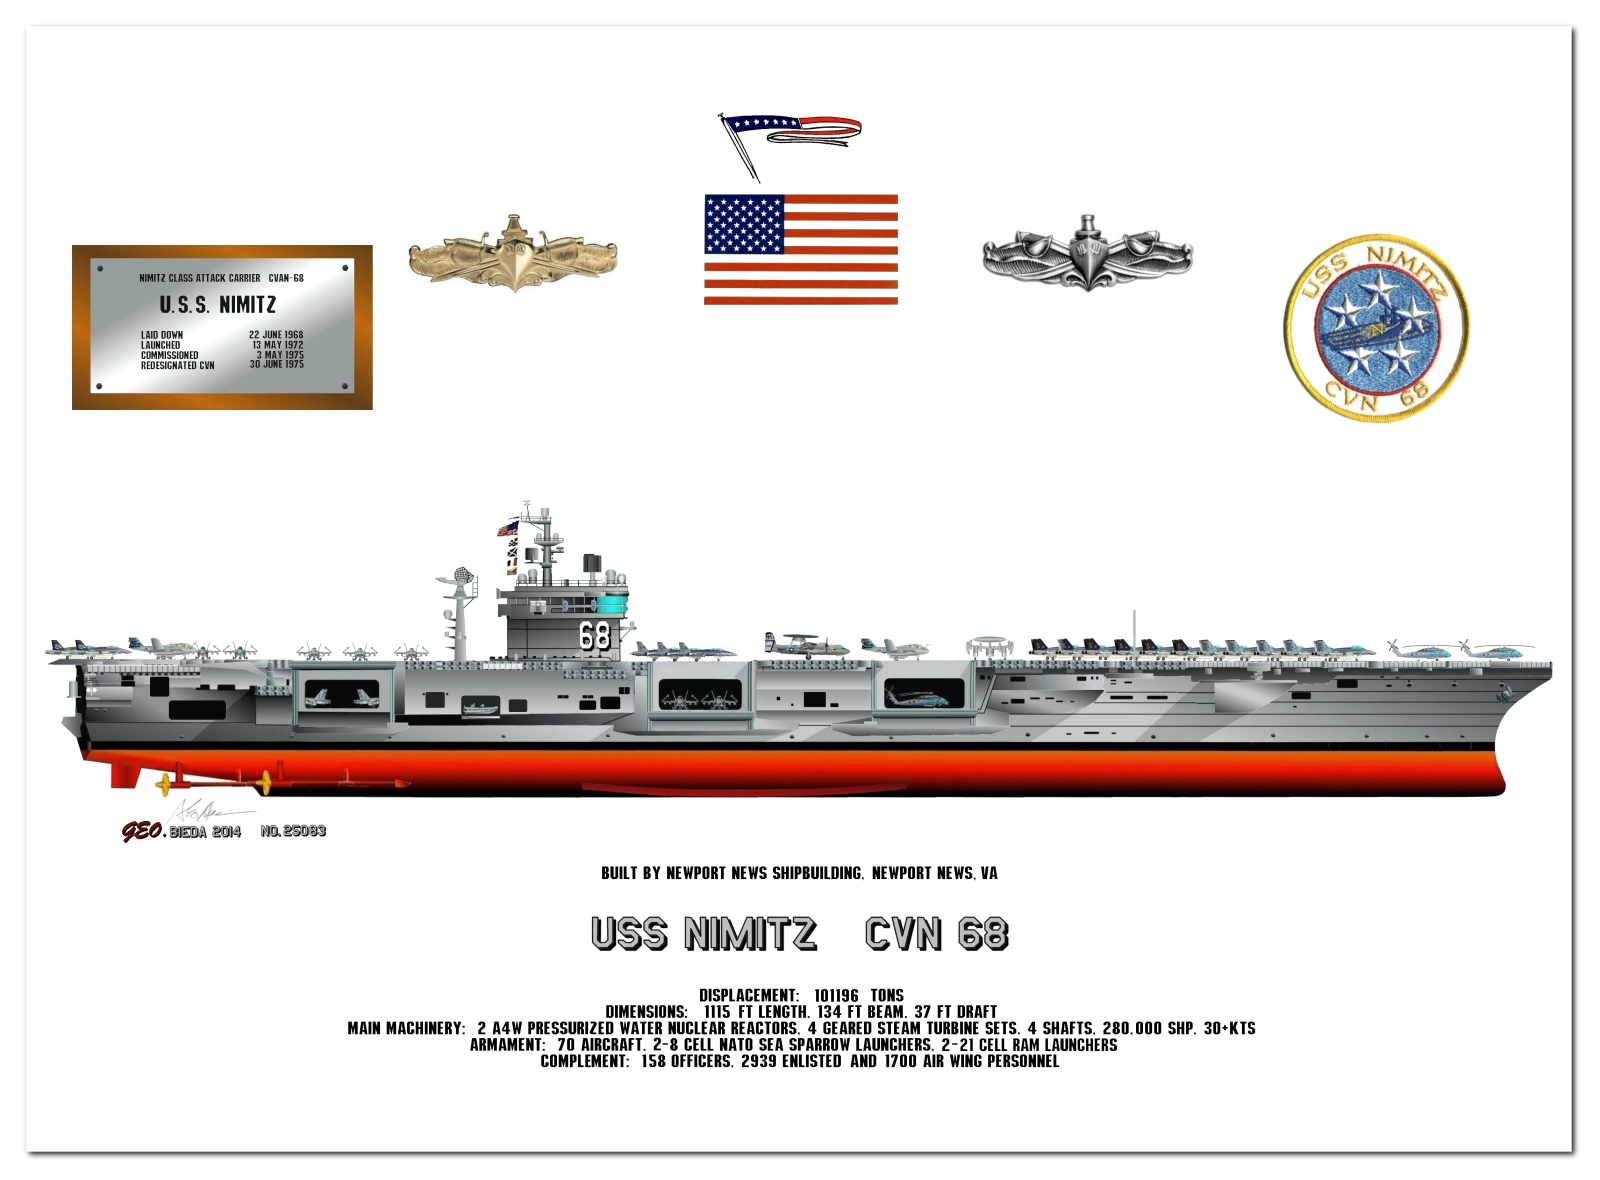 Nimitz Class Aircraft Carrier Profile Drawings by George Bieda